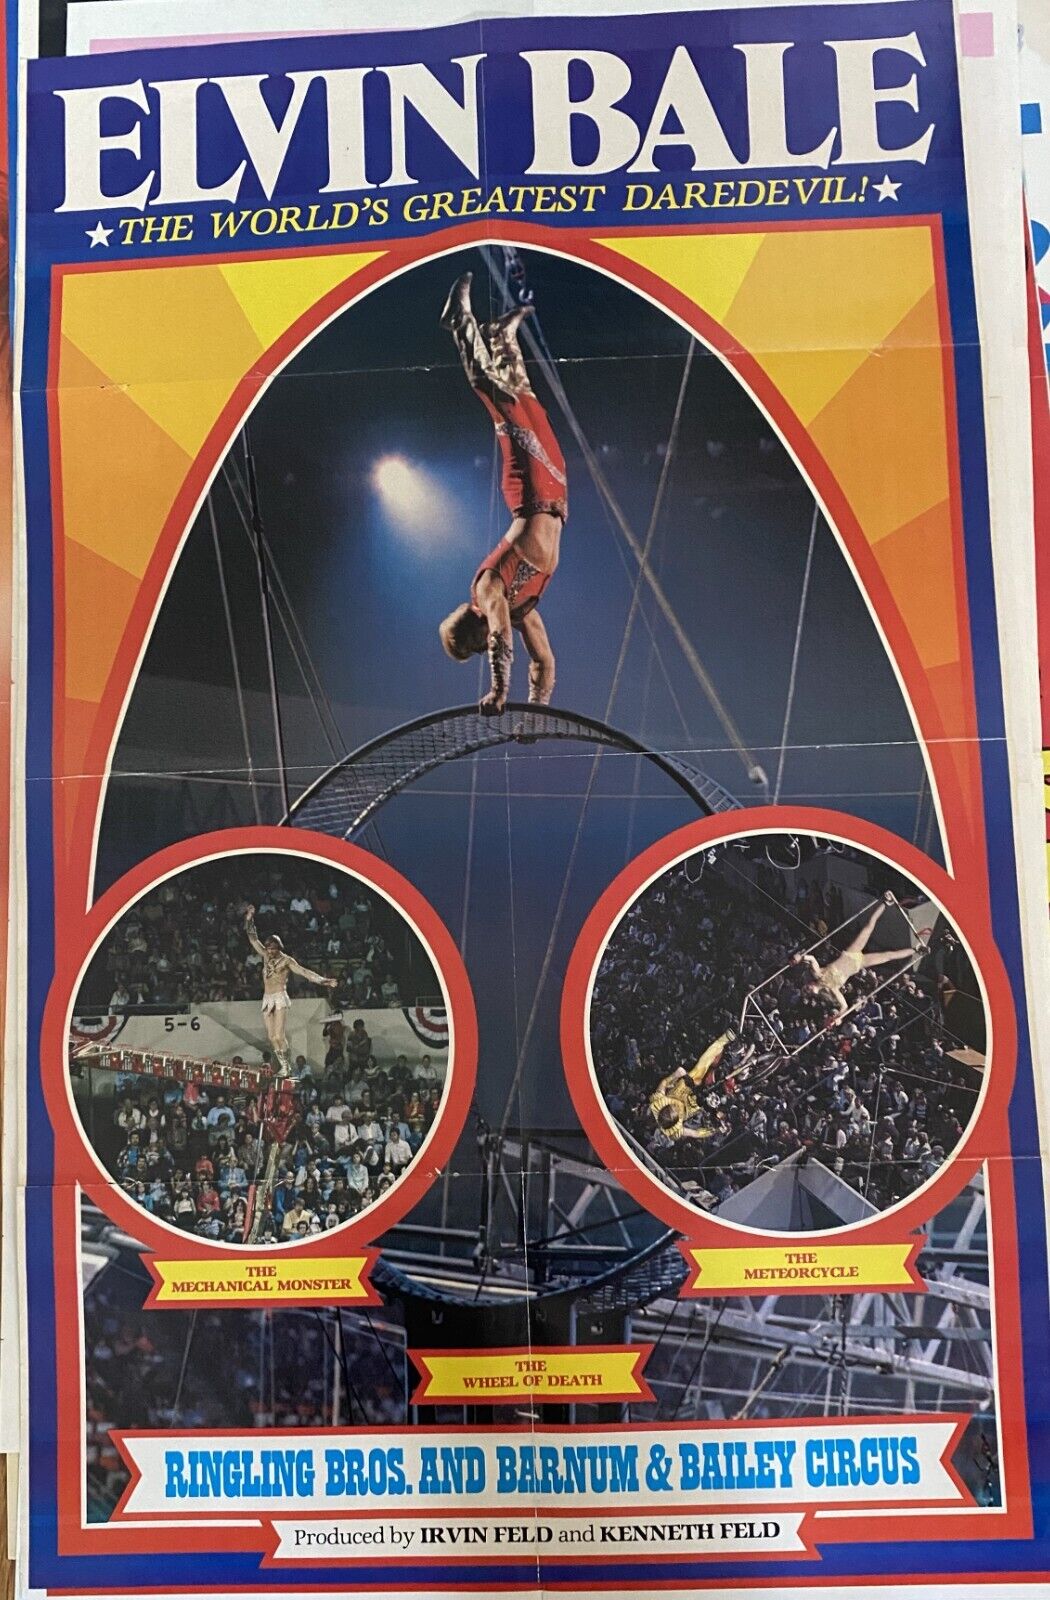 Authentic 1980 Ringling Bros Barnum & Bailey Circus Poster Elvin Bale Full Sheet